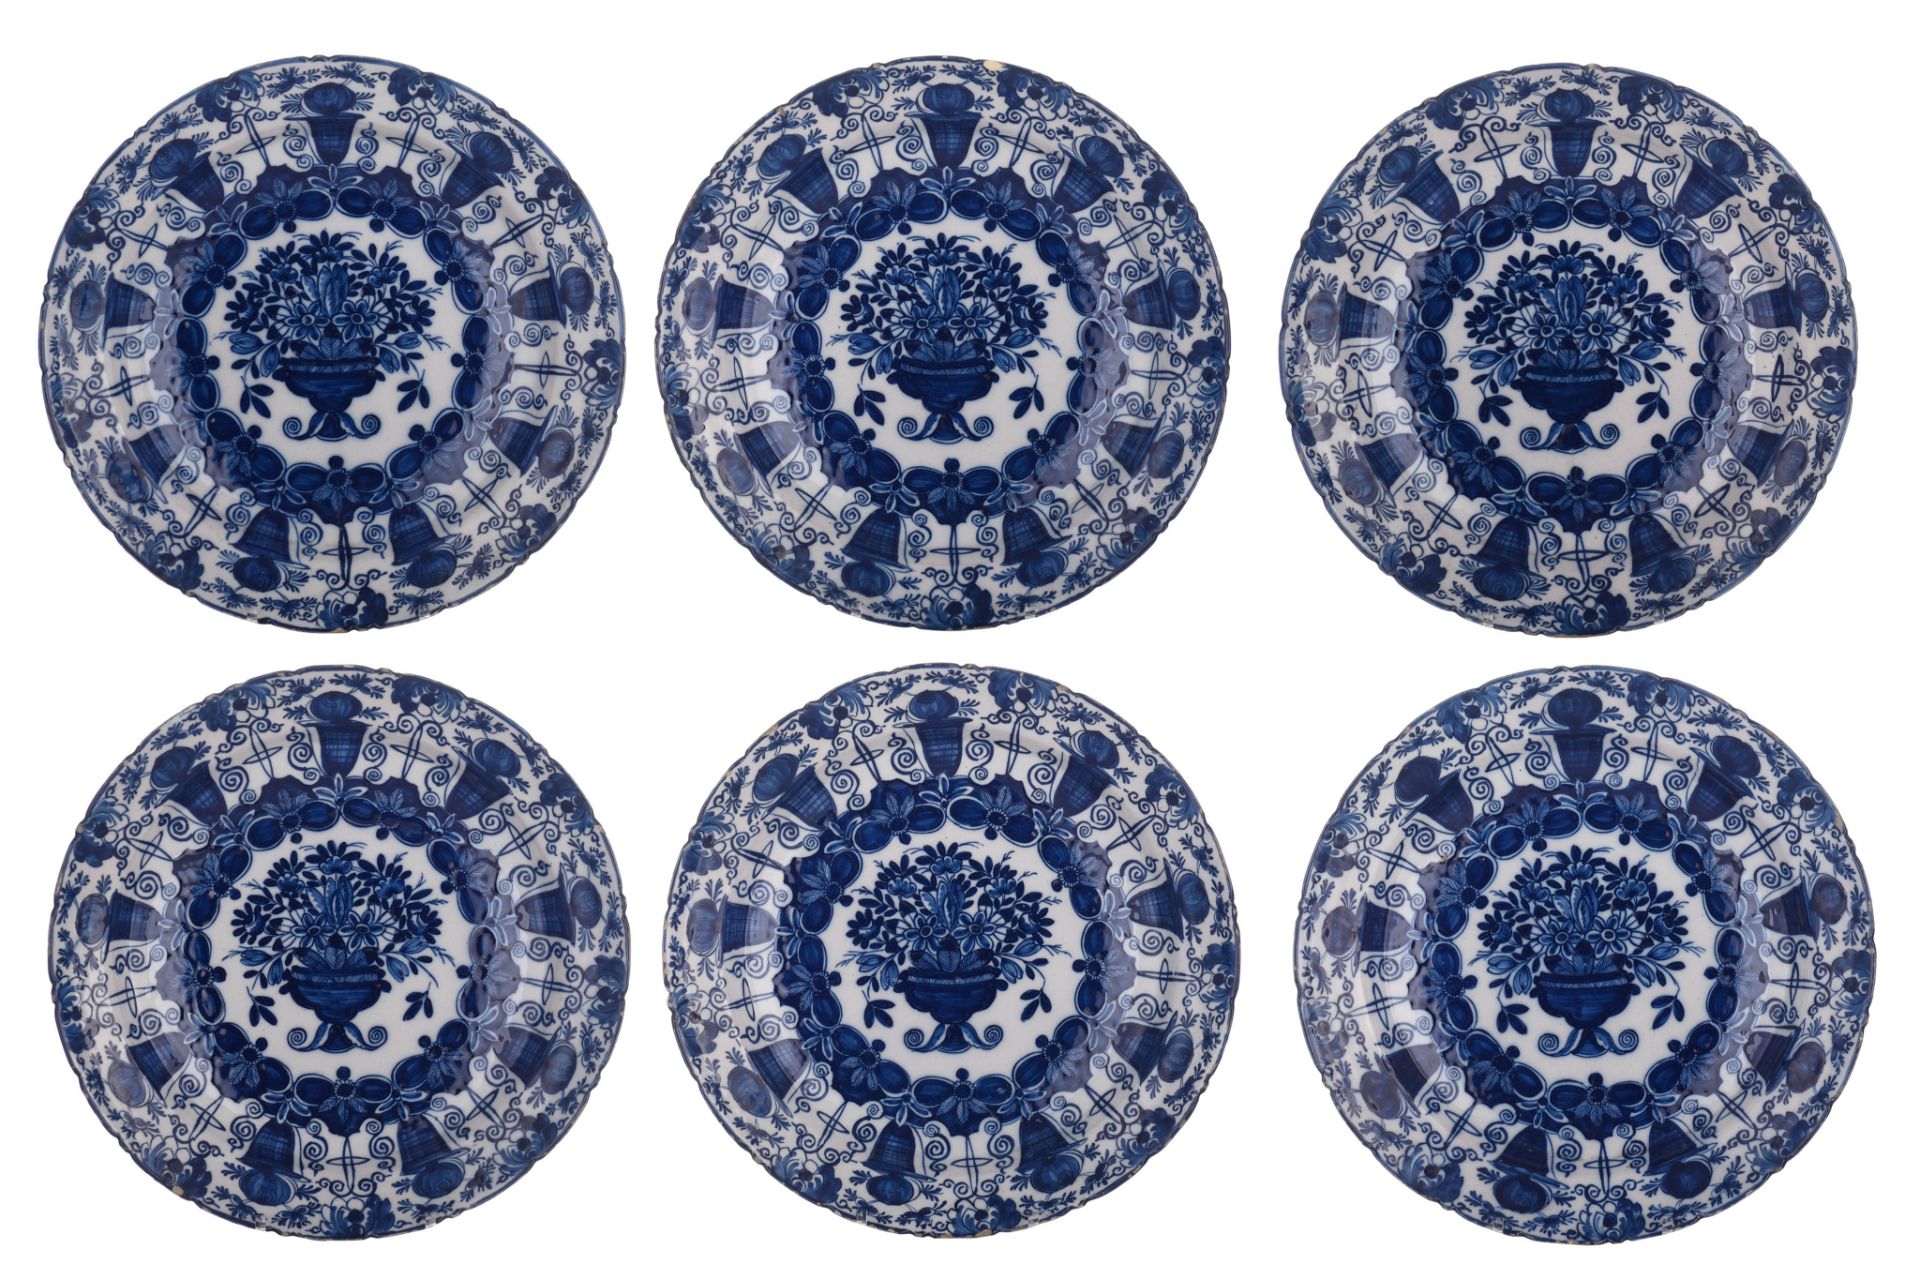 A collection of six Delft blue and white flower basket chargers, marked 'De Klauw', 18thC, ¯ 35 cm